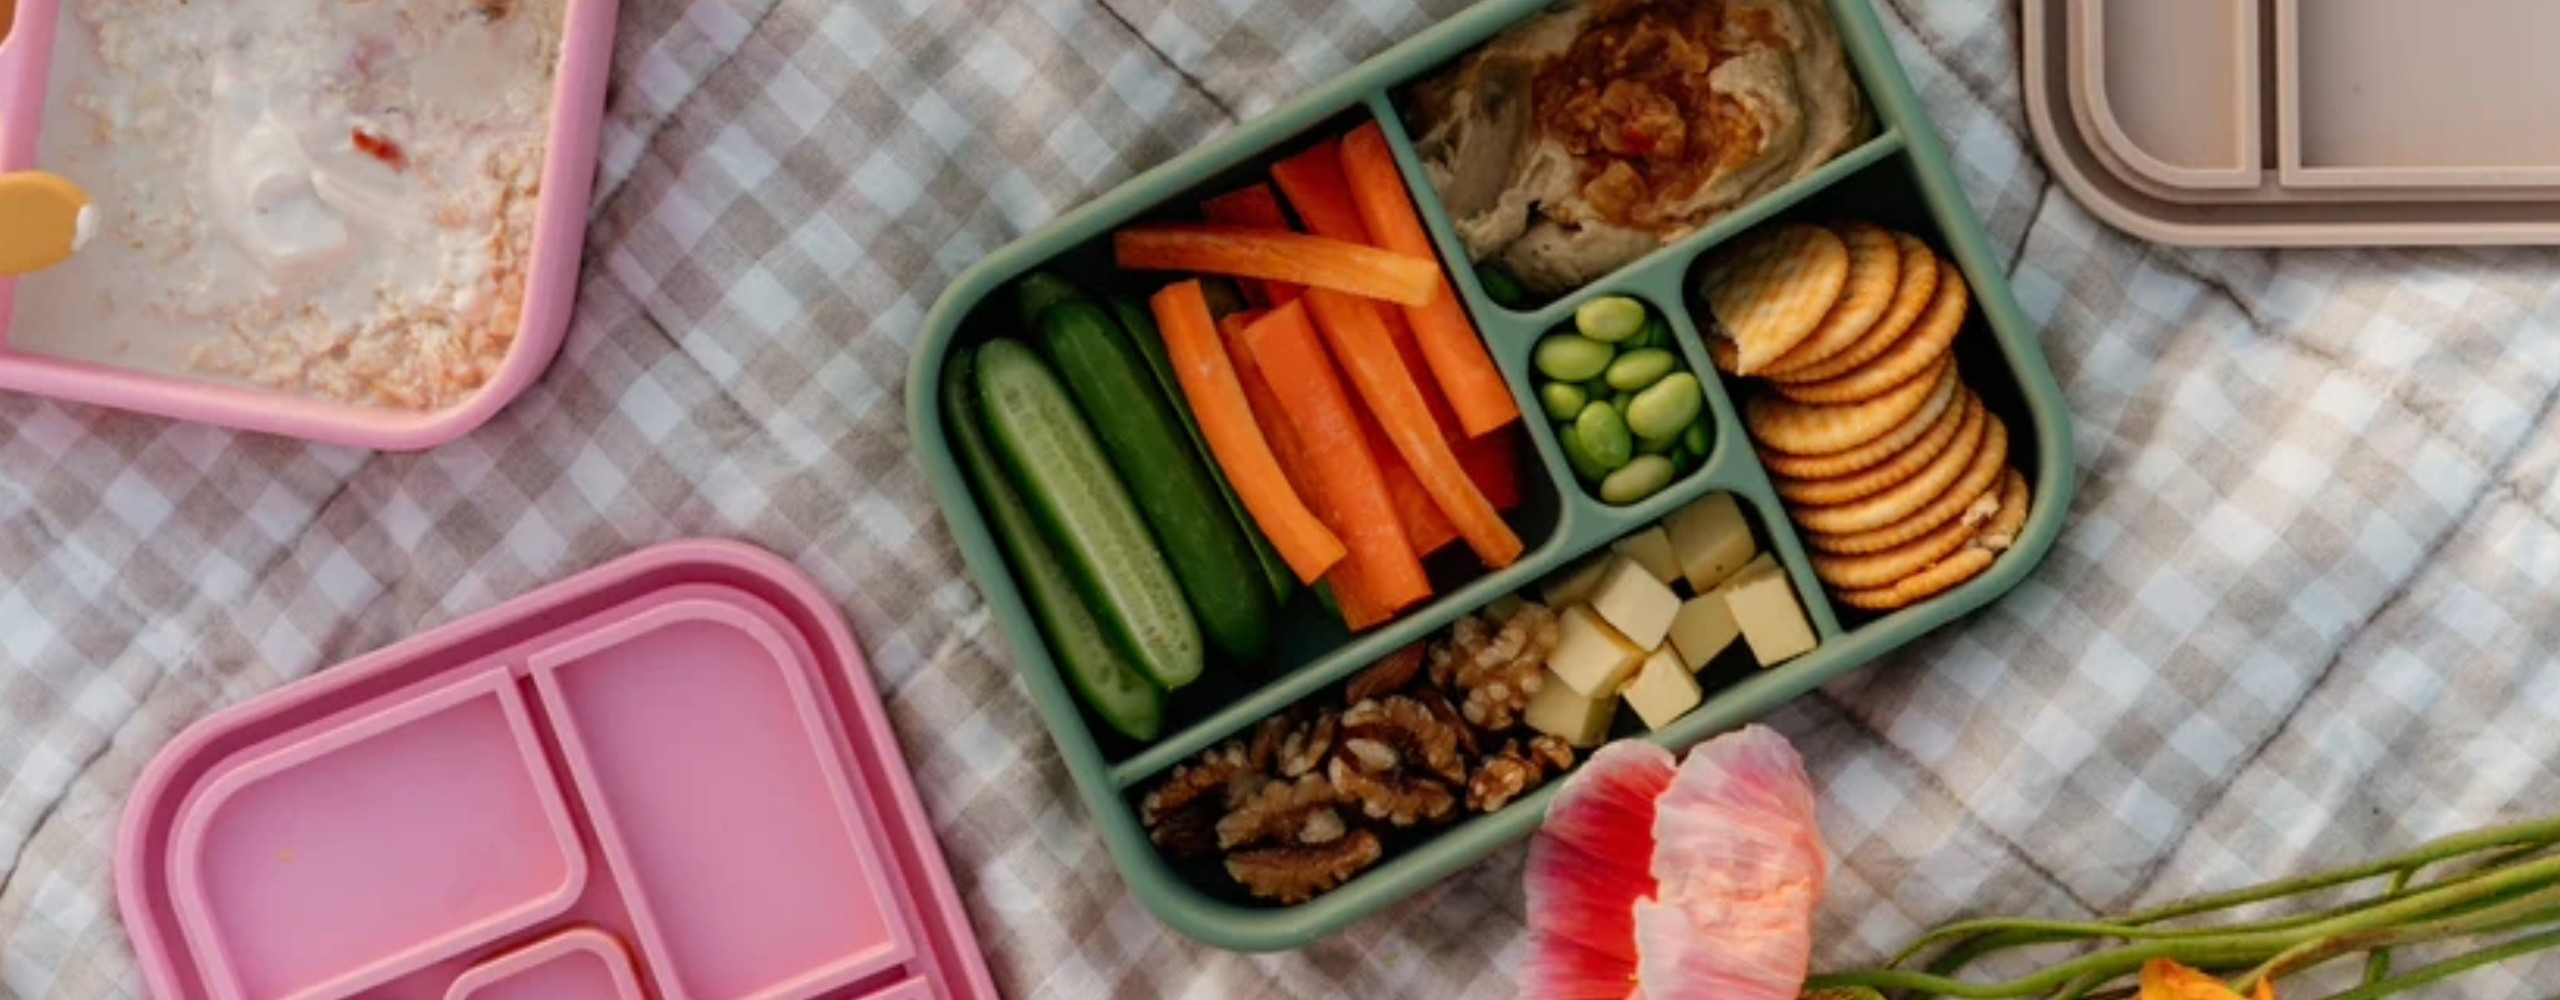 Sage Bento Lunchbox from The Zero Waste People